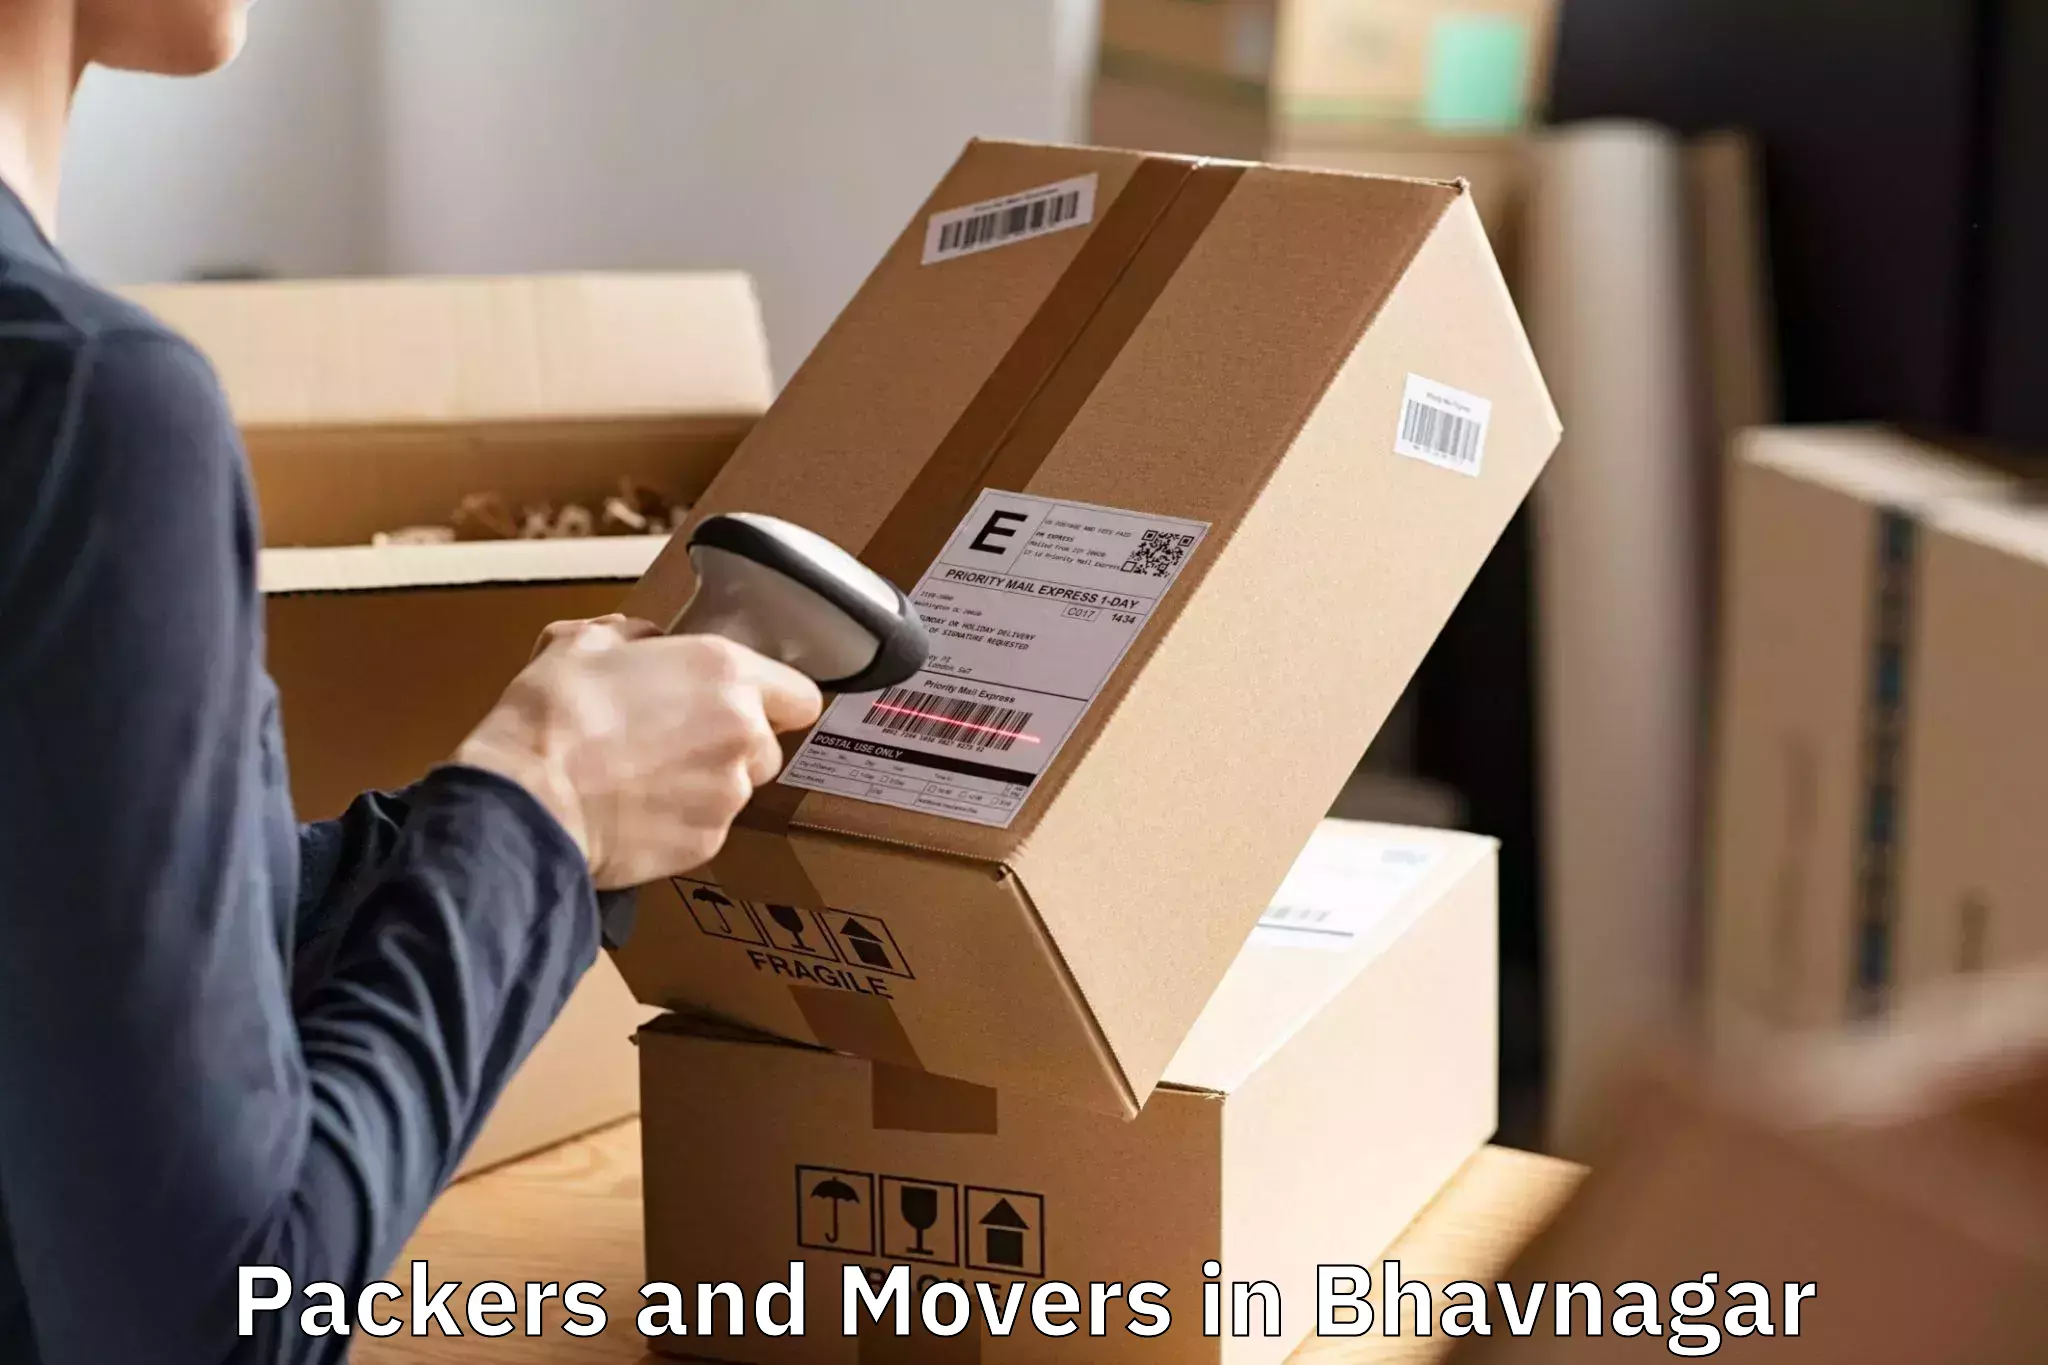 Packers And Movers Booking in Bhavnagar, Gujarat (GJ)